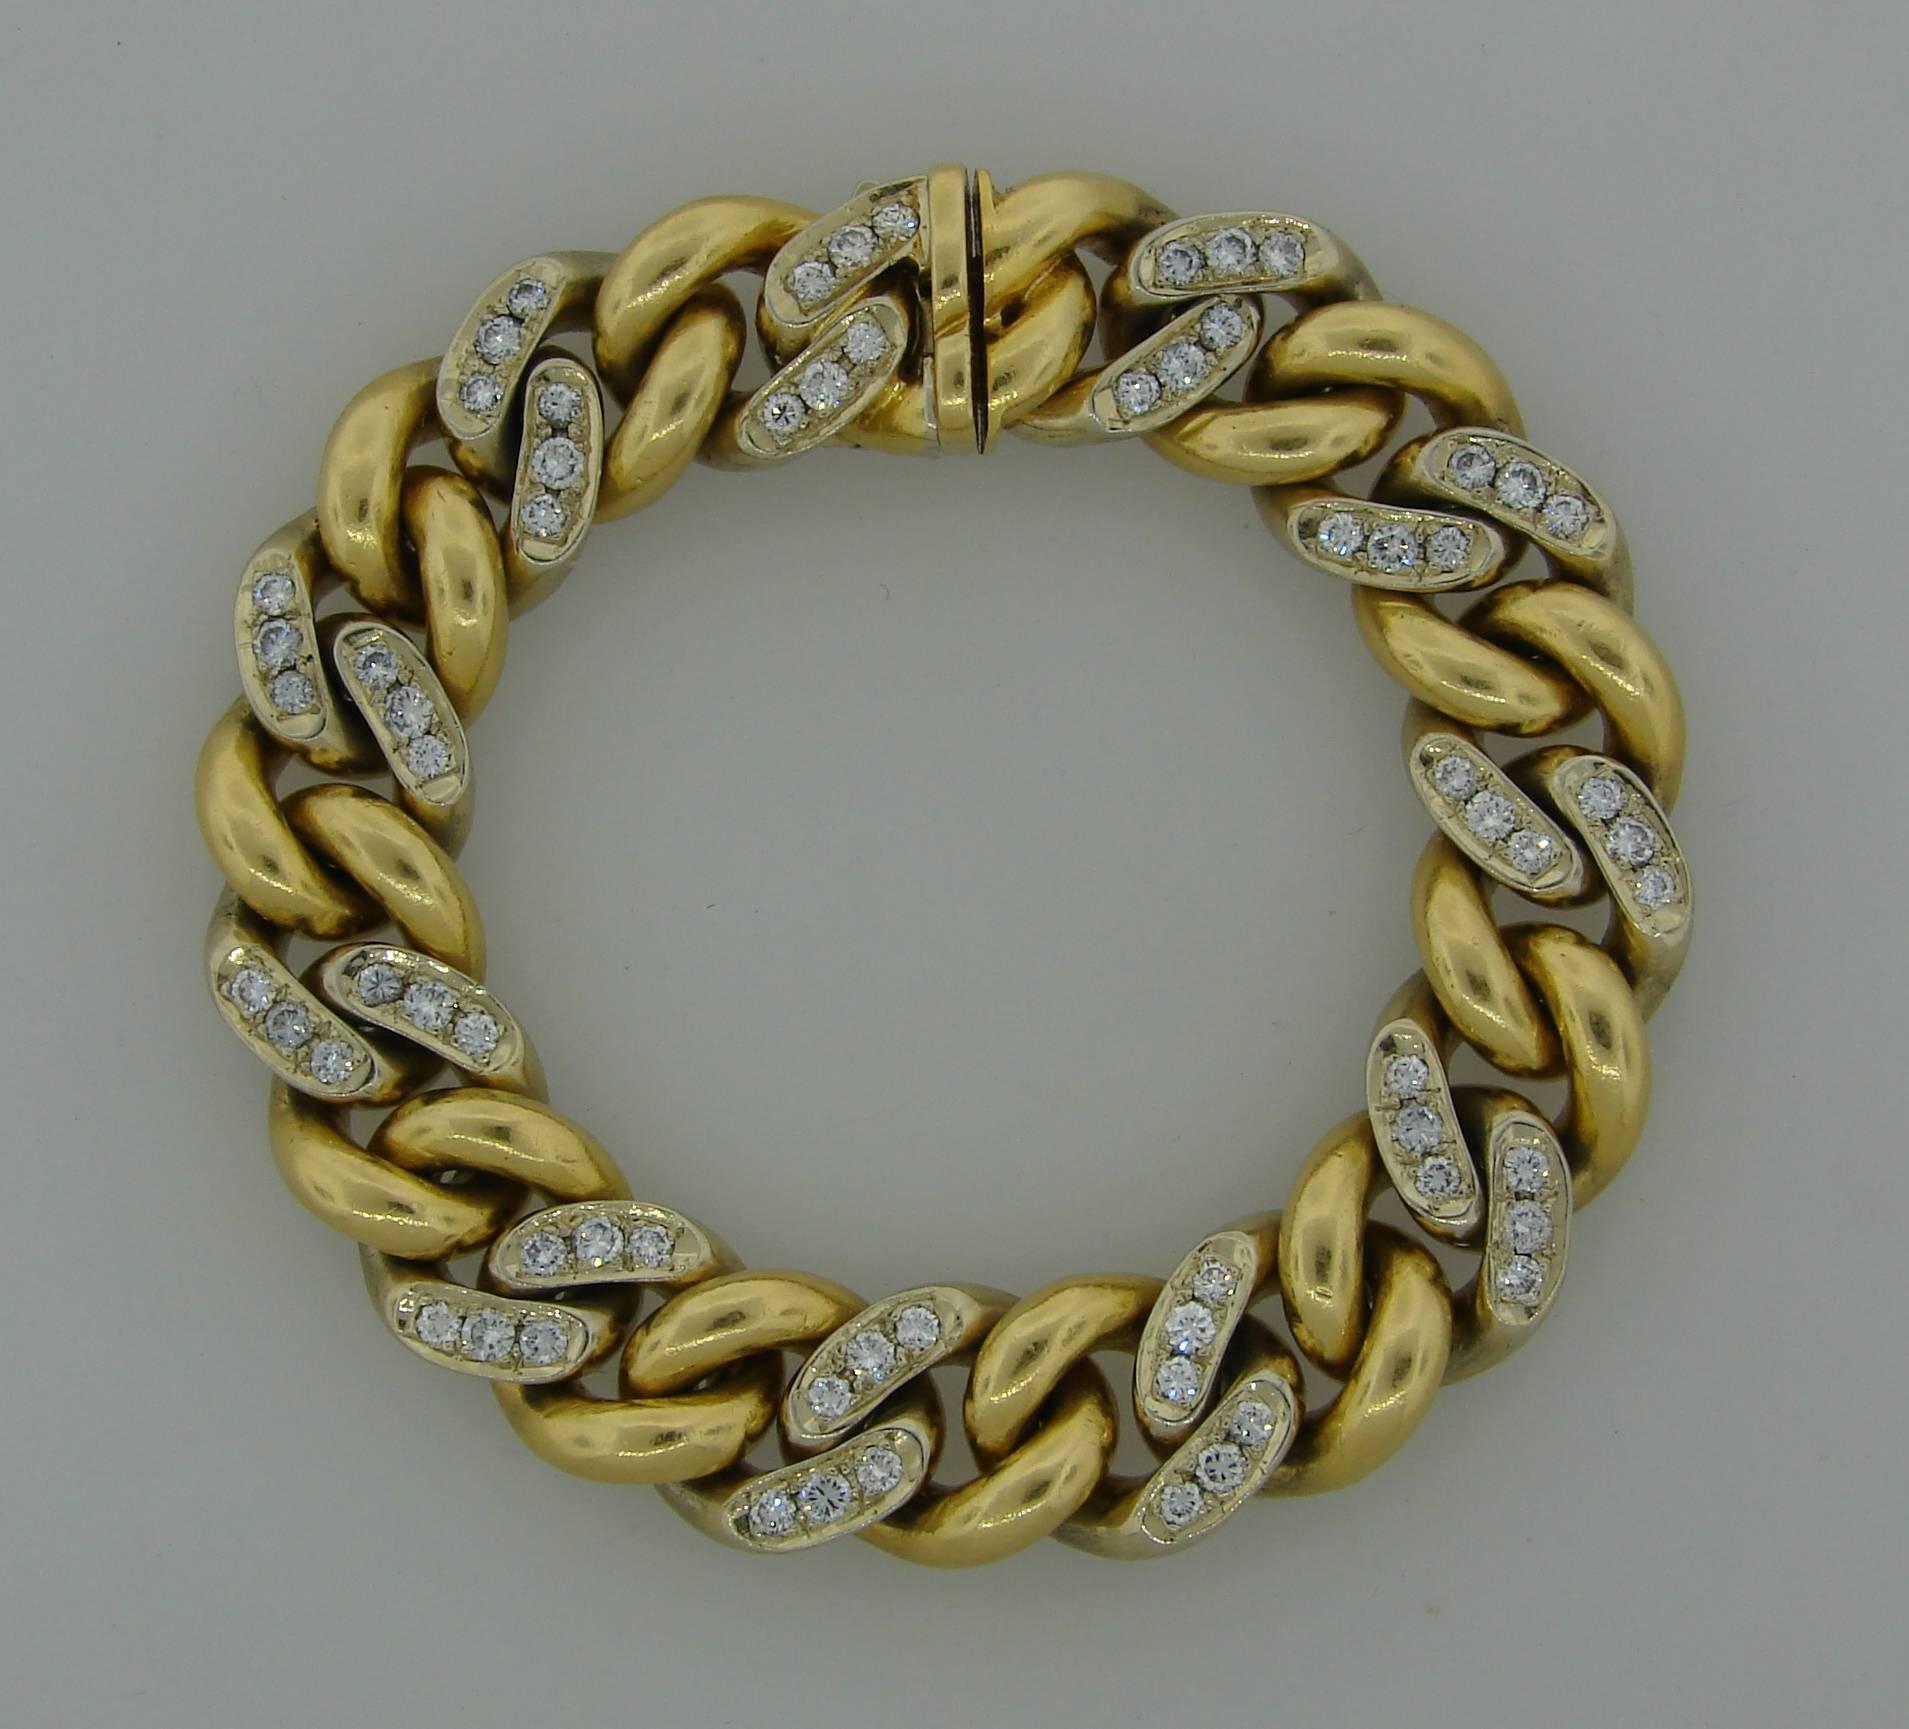 Nice and heavy link bracelet created by Cartier in Italy in the 1970's. Yellow gold links alternate with white gold links and the white gold links are encrusted with round brilliant cut diamonds (total weight approximately 2.40 carats). 
The